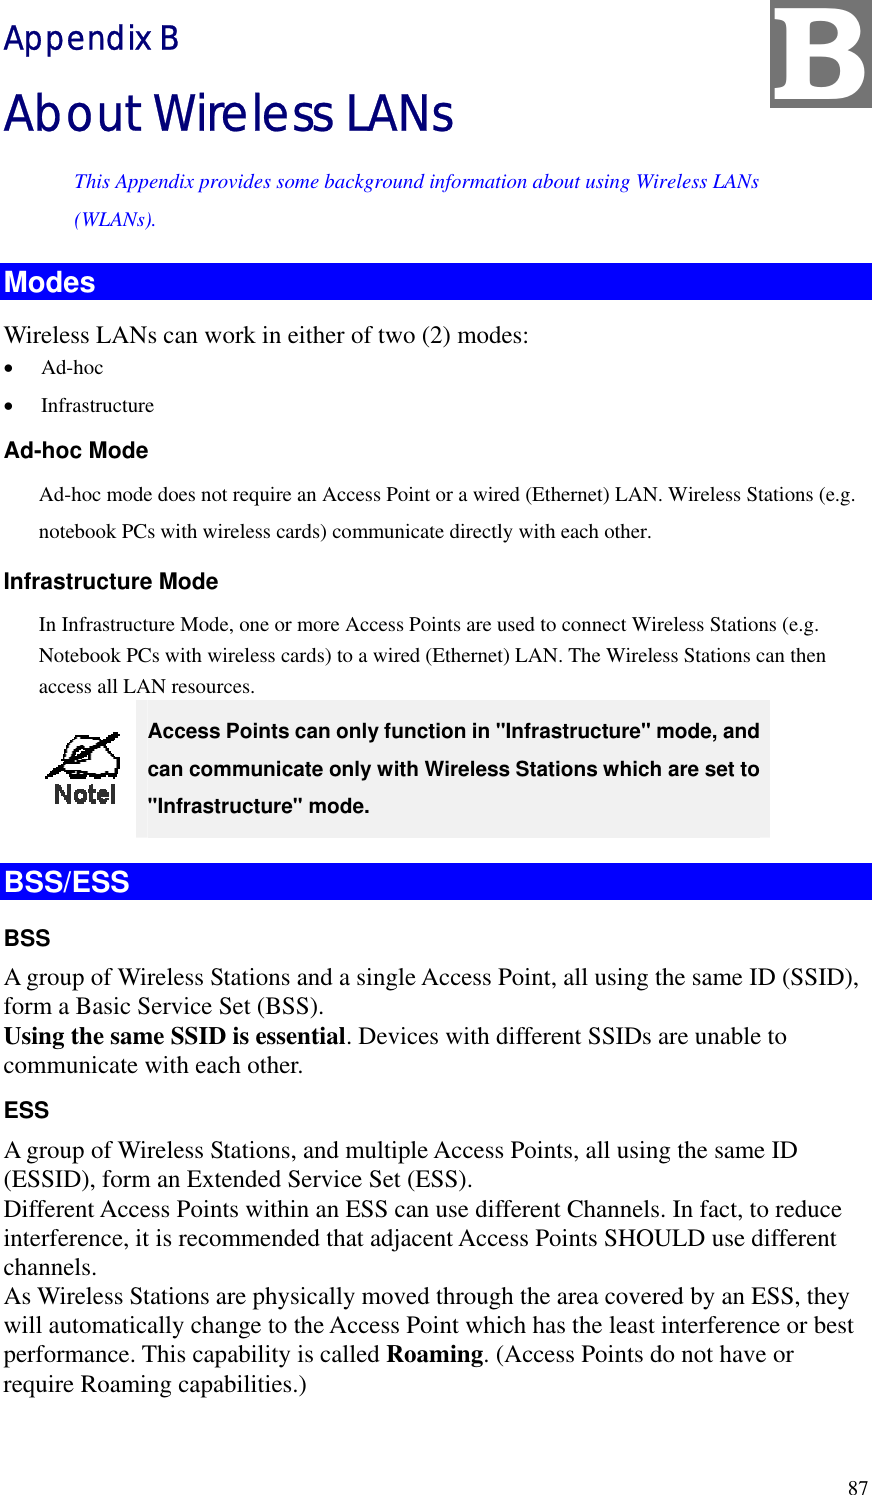 B Appendix B About Wireless LANs This Appendix provides some background information about using Wireless LANs (WLANs). Modes Wireless LANs can work in either of two (2) modes: •  Ad-hoc •  Infrastructure Ad-hoc Mode Ad-hoc mode does not require an Access Point or a wired (Ethernet) LAN. Wireless Stations (e.g. notebook PCs with wireless cards) communicate directly with each other. Infrastructure Mode In Infrastructure Mode, one or more Access Points are used to connect Wireless Stations (e.g. Notebook PCs with wireless cards) to a wired (Ethernet) LAN. The Wireless Stations can then access all LAN resources.  Access Points can only function in &quot;Infrastructure&quot; mode, and can communicate only with Wireless Stations which are set to &quot;Infrastructure&quot; mode. BSS/ESS BSS A group of Wireless Stations and a single Access Point, all using the same ID (SSID), form a Basic Service Set (BSS). Using the same SSID is essential. Devices with different SSIDs are unable to communicate with each other. ESS A group of Wireless Stations, and multiple Access Points, all using the same ID (ESSID), form an Extended Service Set (ESS). Different Access Points within an ESS can use different Channels. In fact, to reduce interference, it is recommended that adjacent Access Points SHOULD use different channels. As Wireless Stations are physically moved through the area covered by an ESS, they will automatically change to the Access Point which has the least interference or best performance. This capability is called Roaming. (Access Points do not have or require Roaming capabilities.)  87 